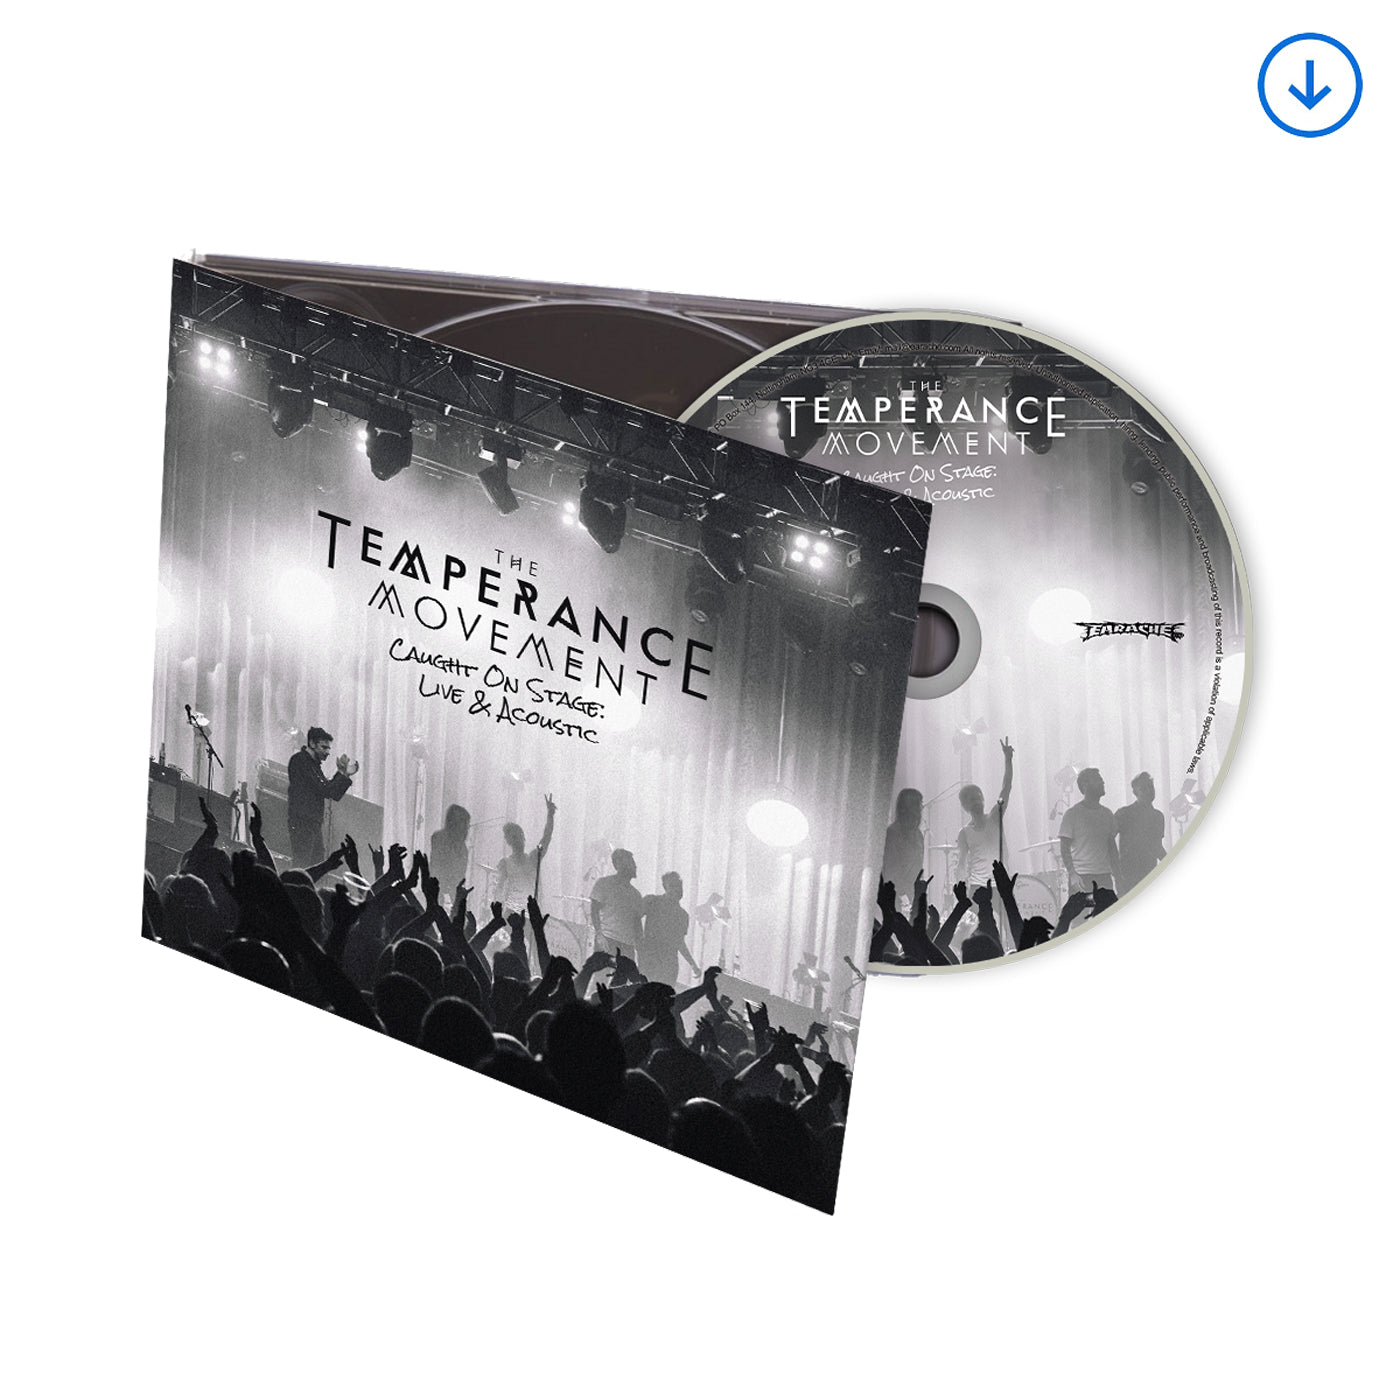 The Temperance Movement "Caught On Stage - Live & Acoustic" Digipak CD